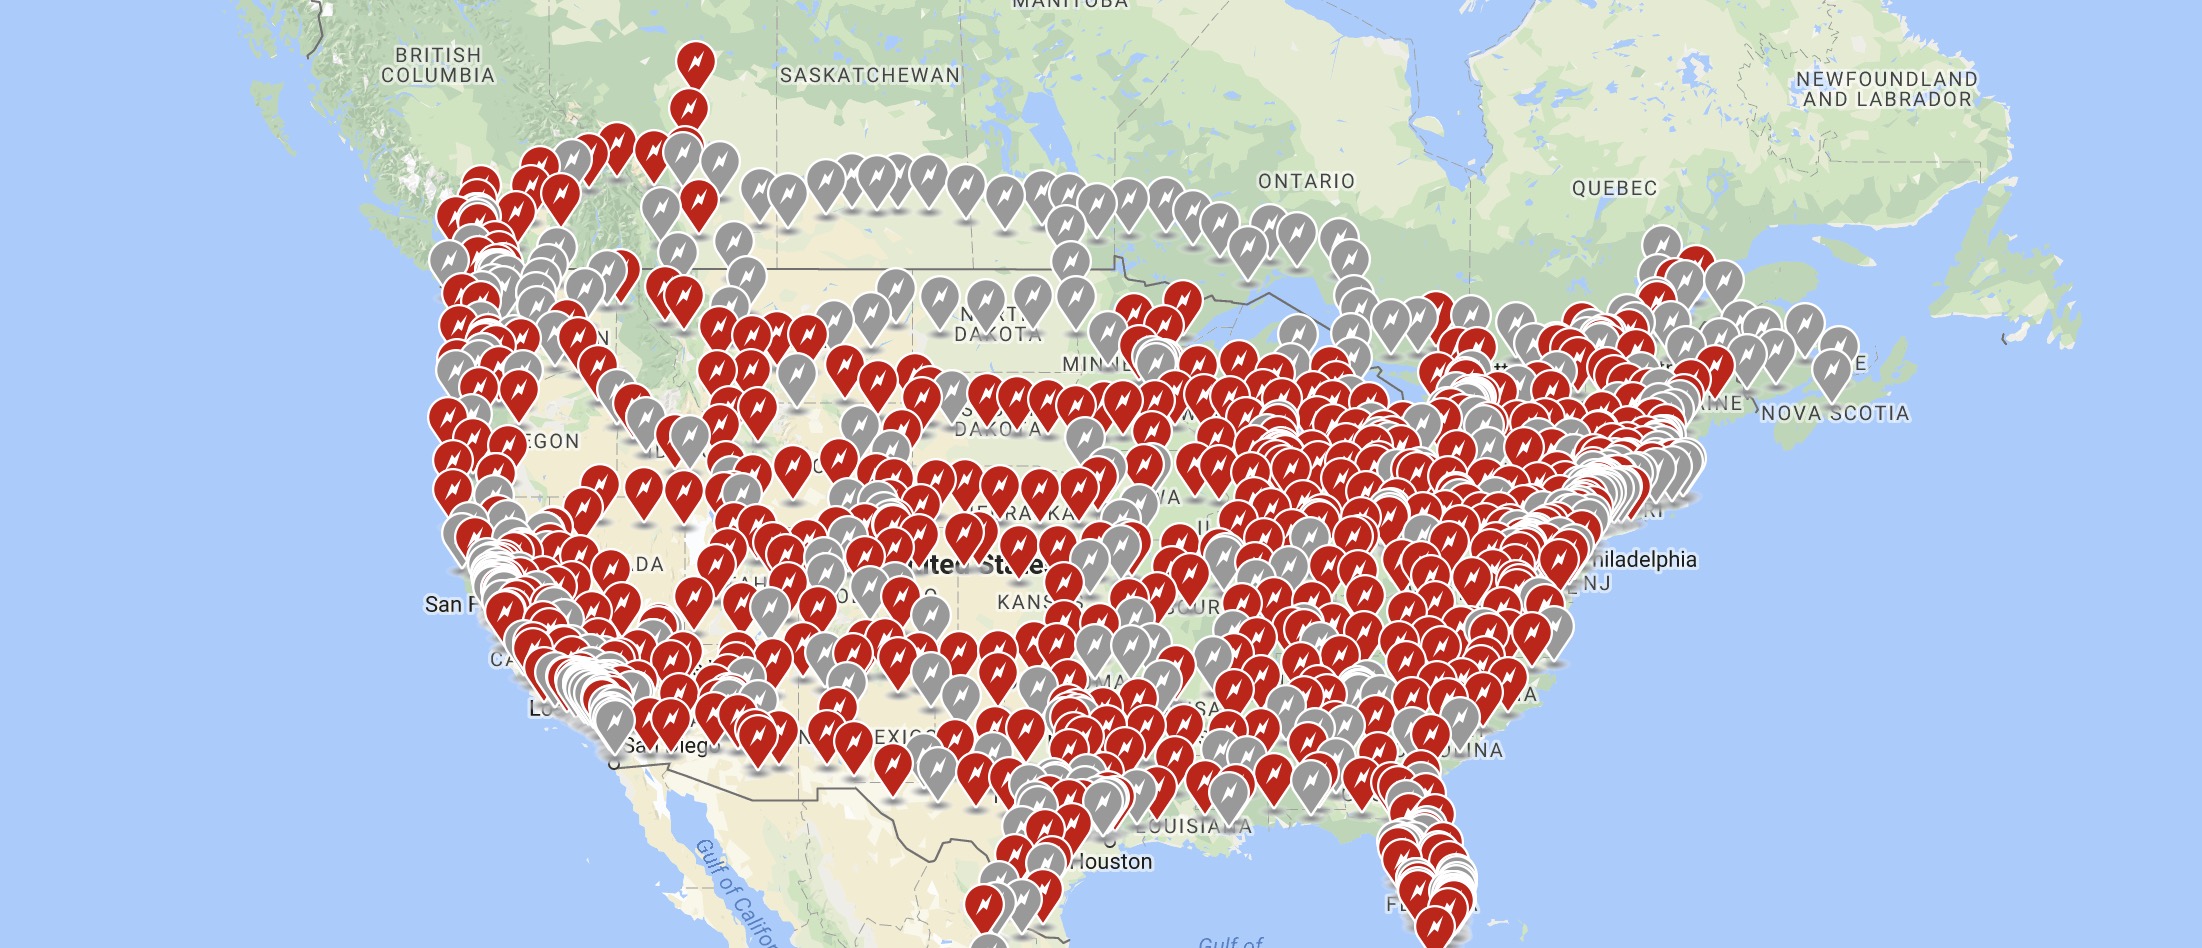 Tesla has thousands of Supercharger stations in construction/permit